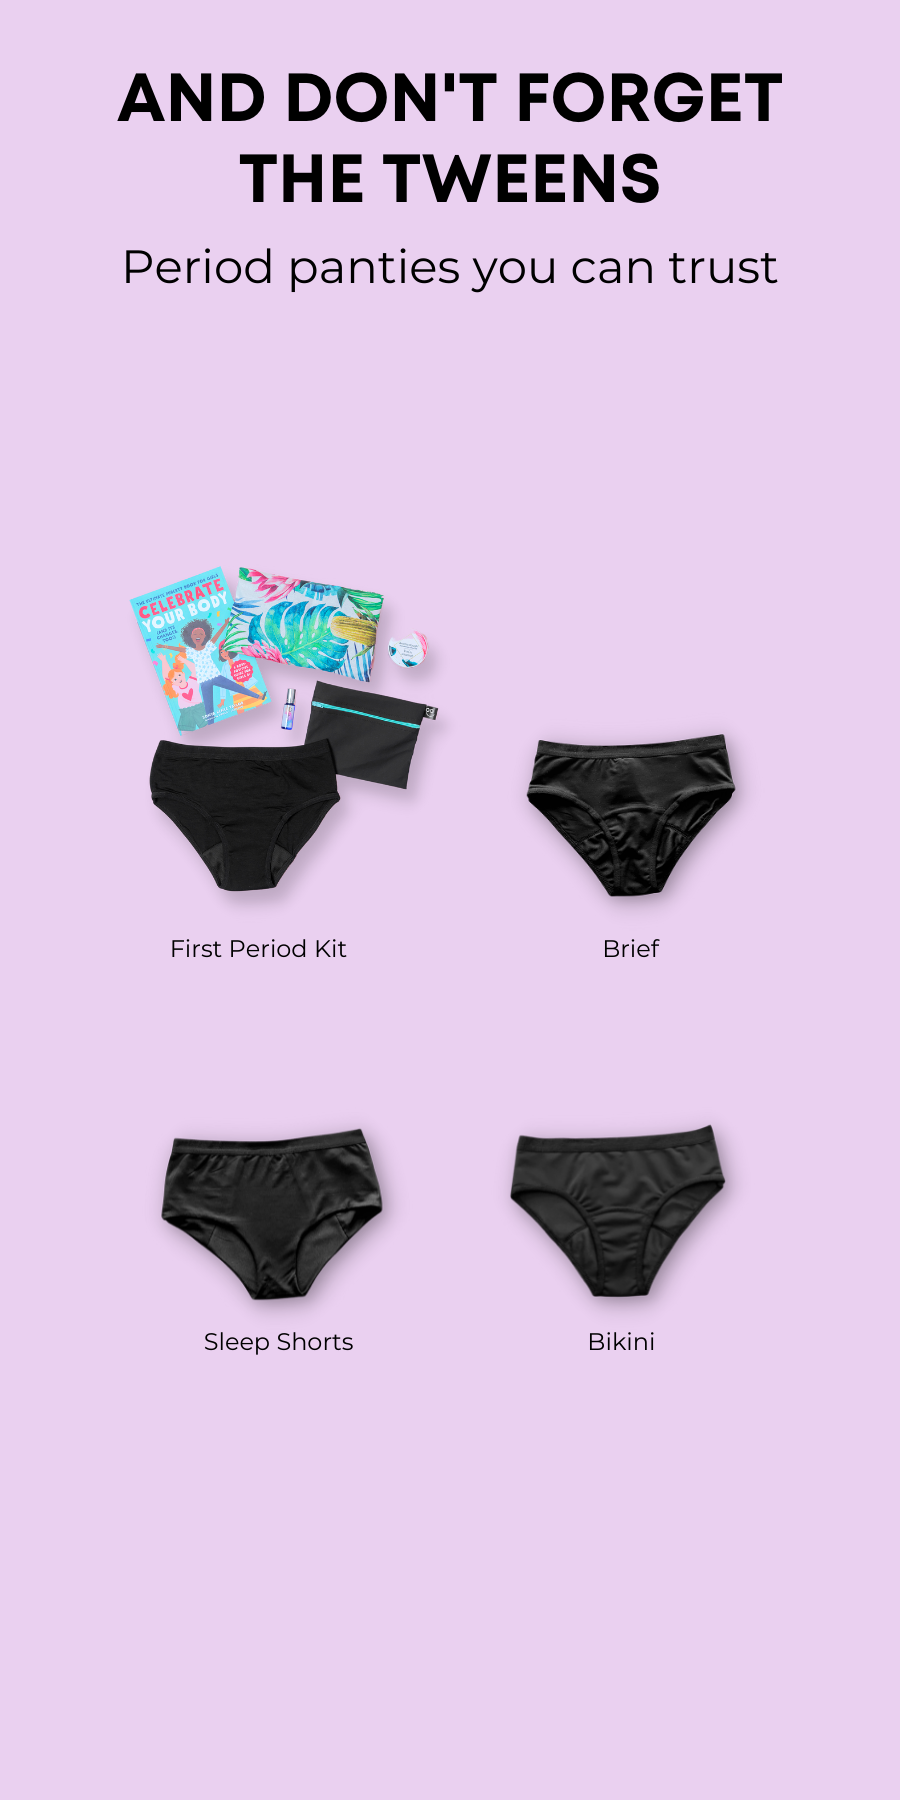 Buy period panties for your tween in soft bamboo or quick drying nylon. Choose between the Brief, the Sleep shorts and the Bikini style. Available in regular or heavy absorption.